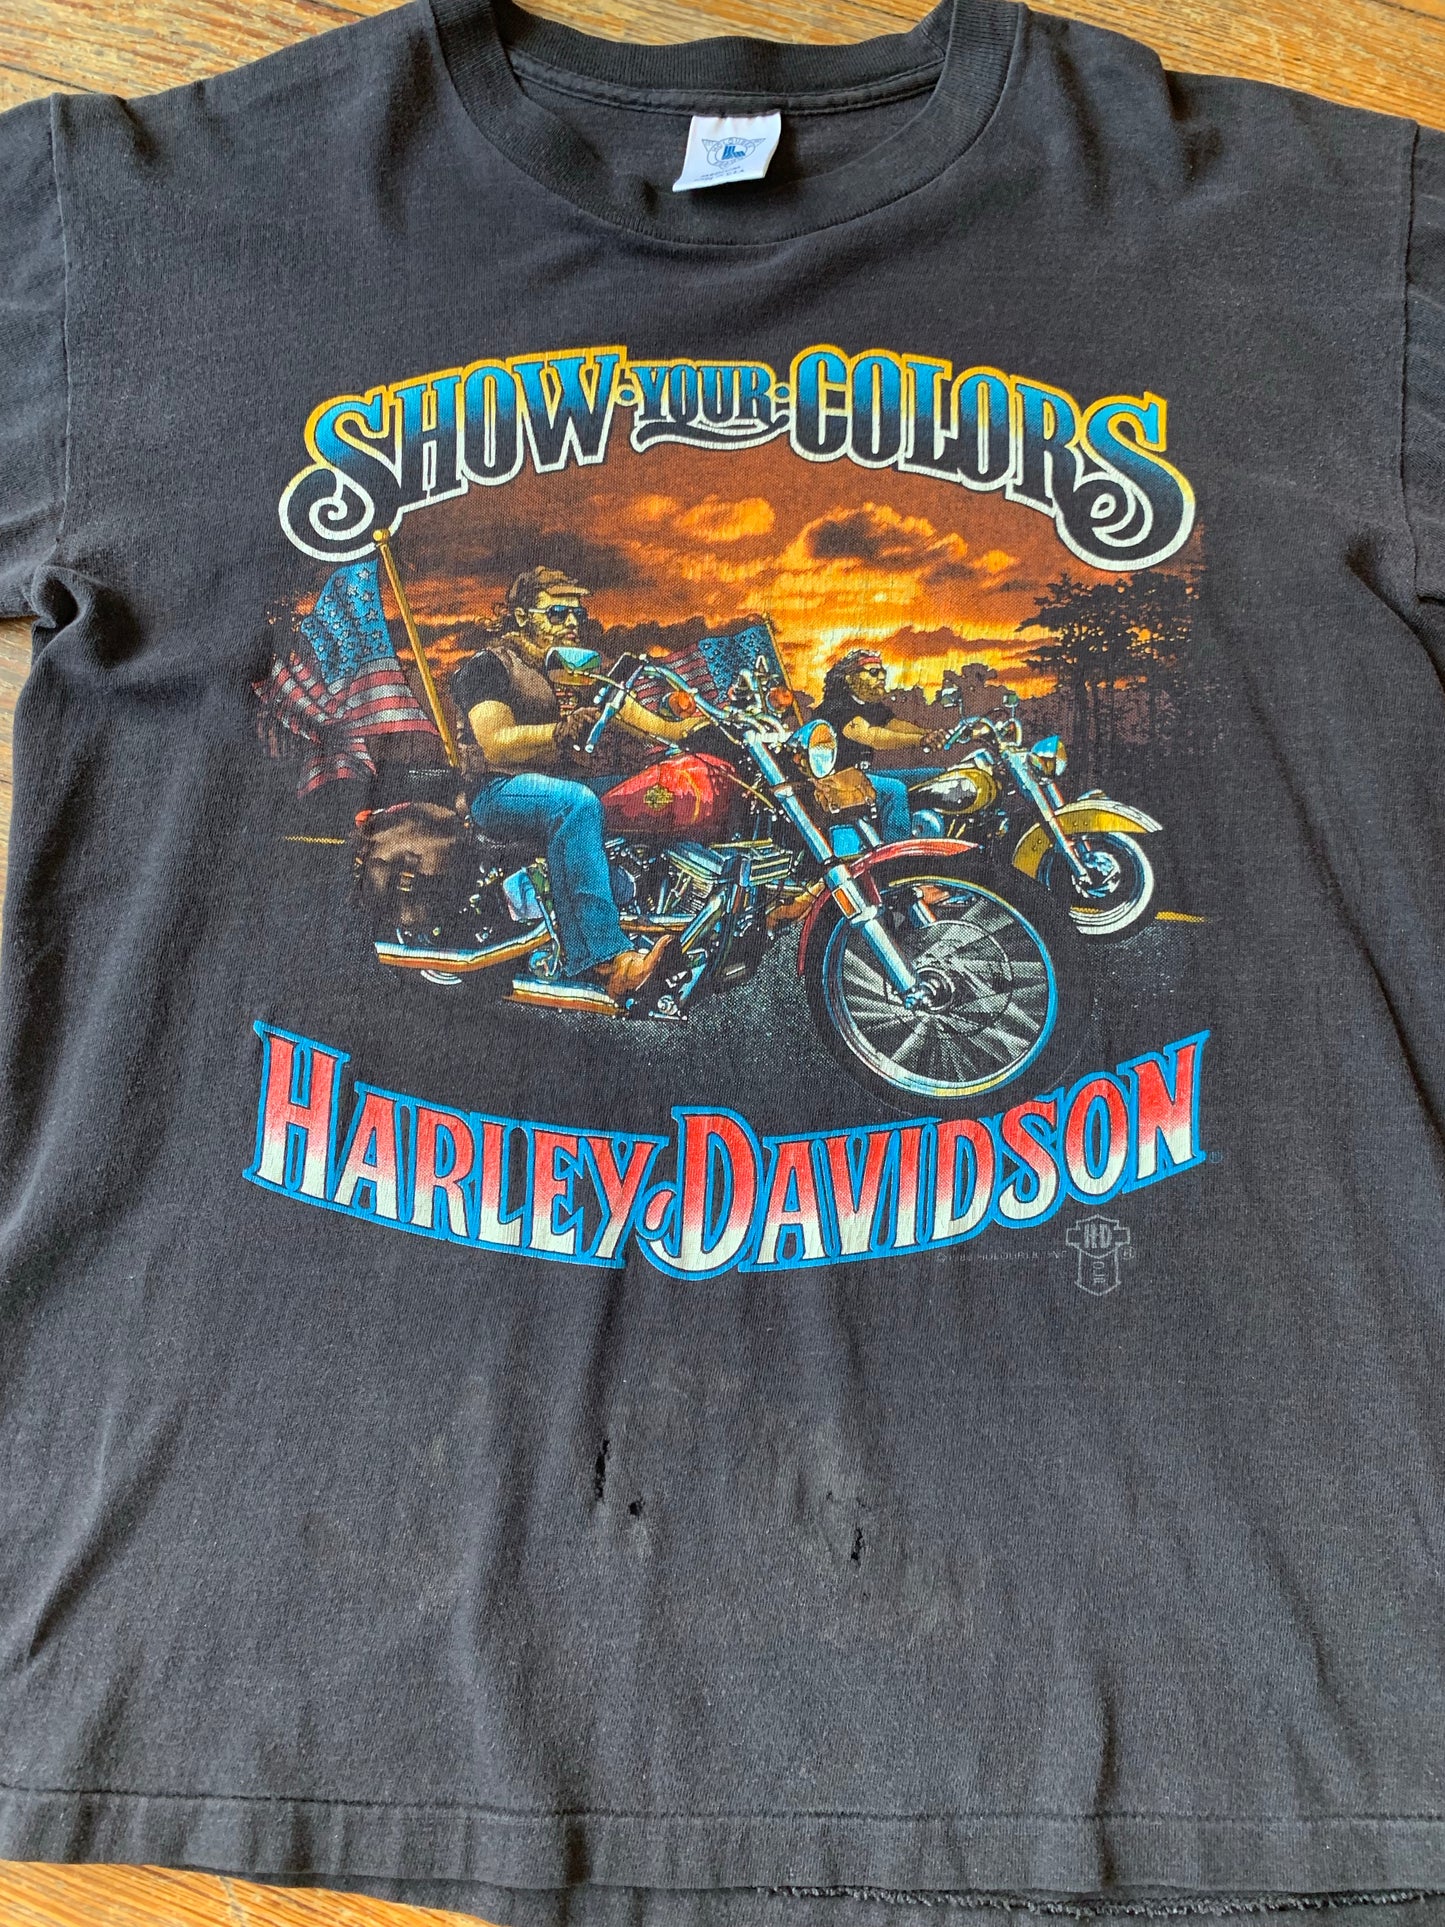 Vintage Harley-Davidson Show Your Colors Tee